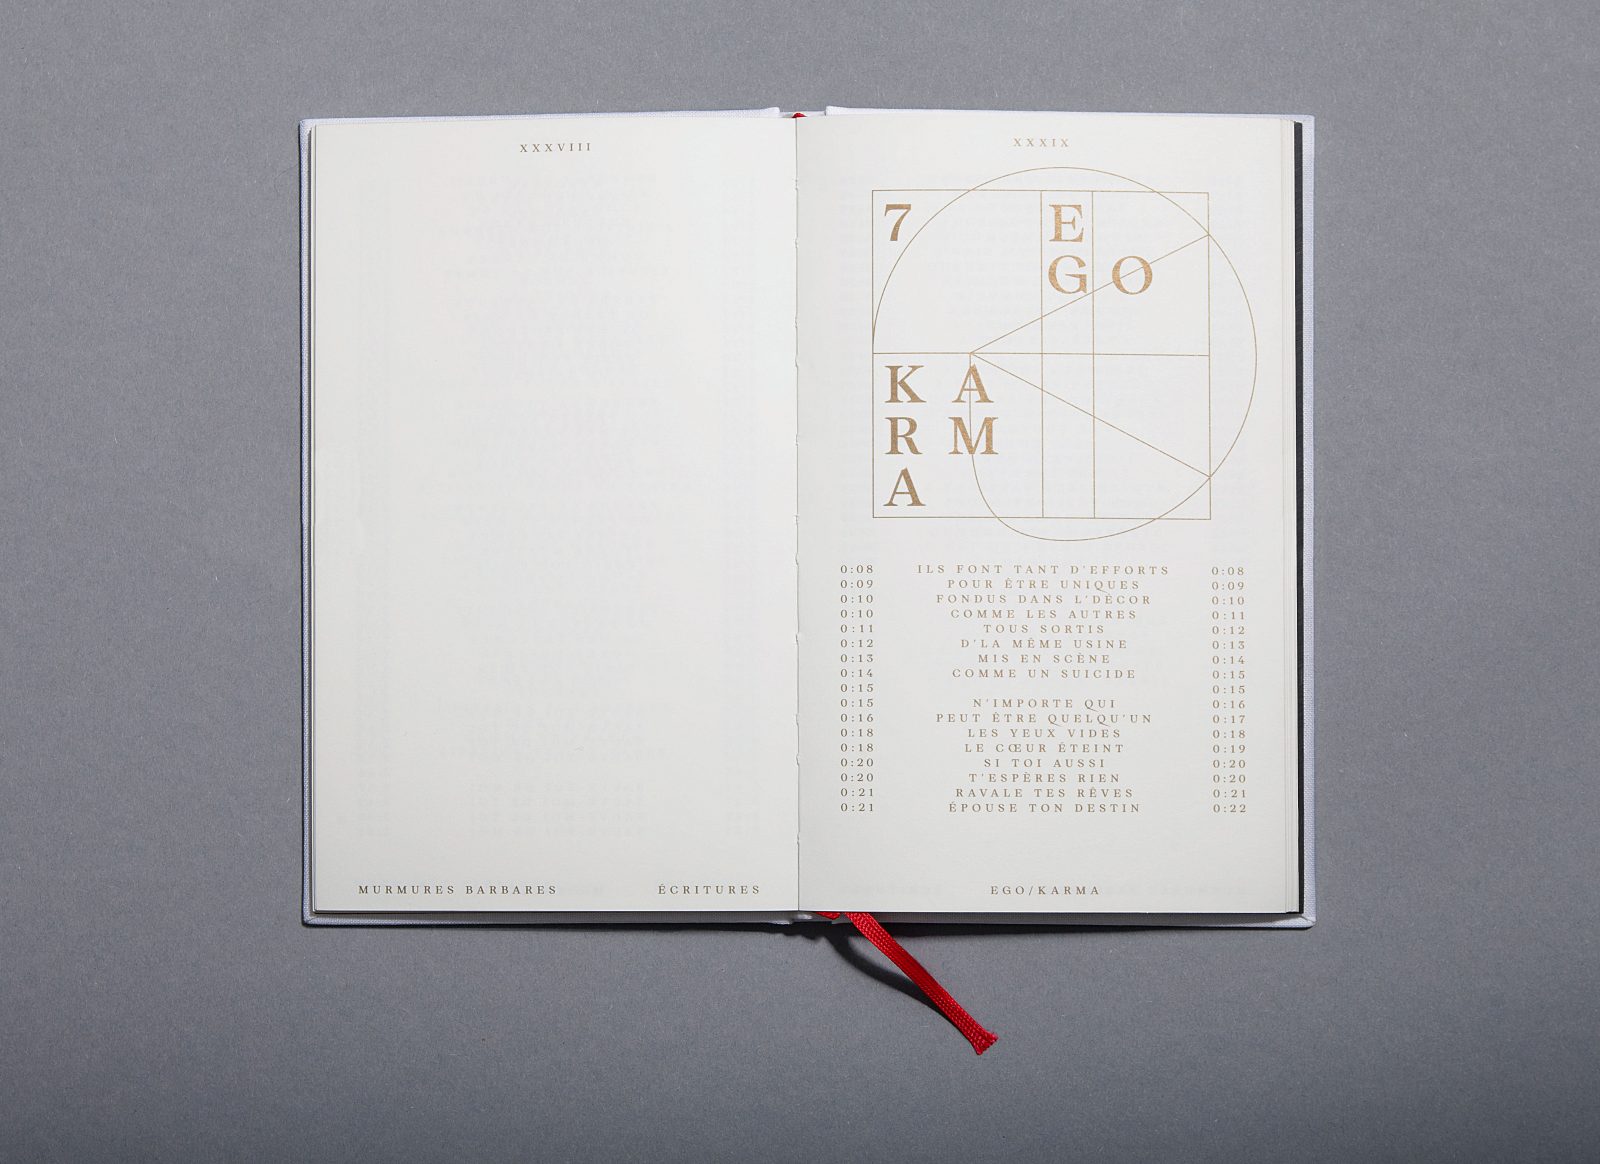 Mantras Album Package Design Inspired by Duality & Modern Religion